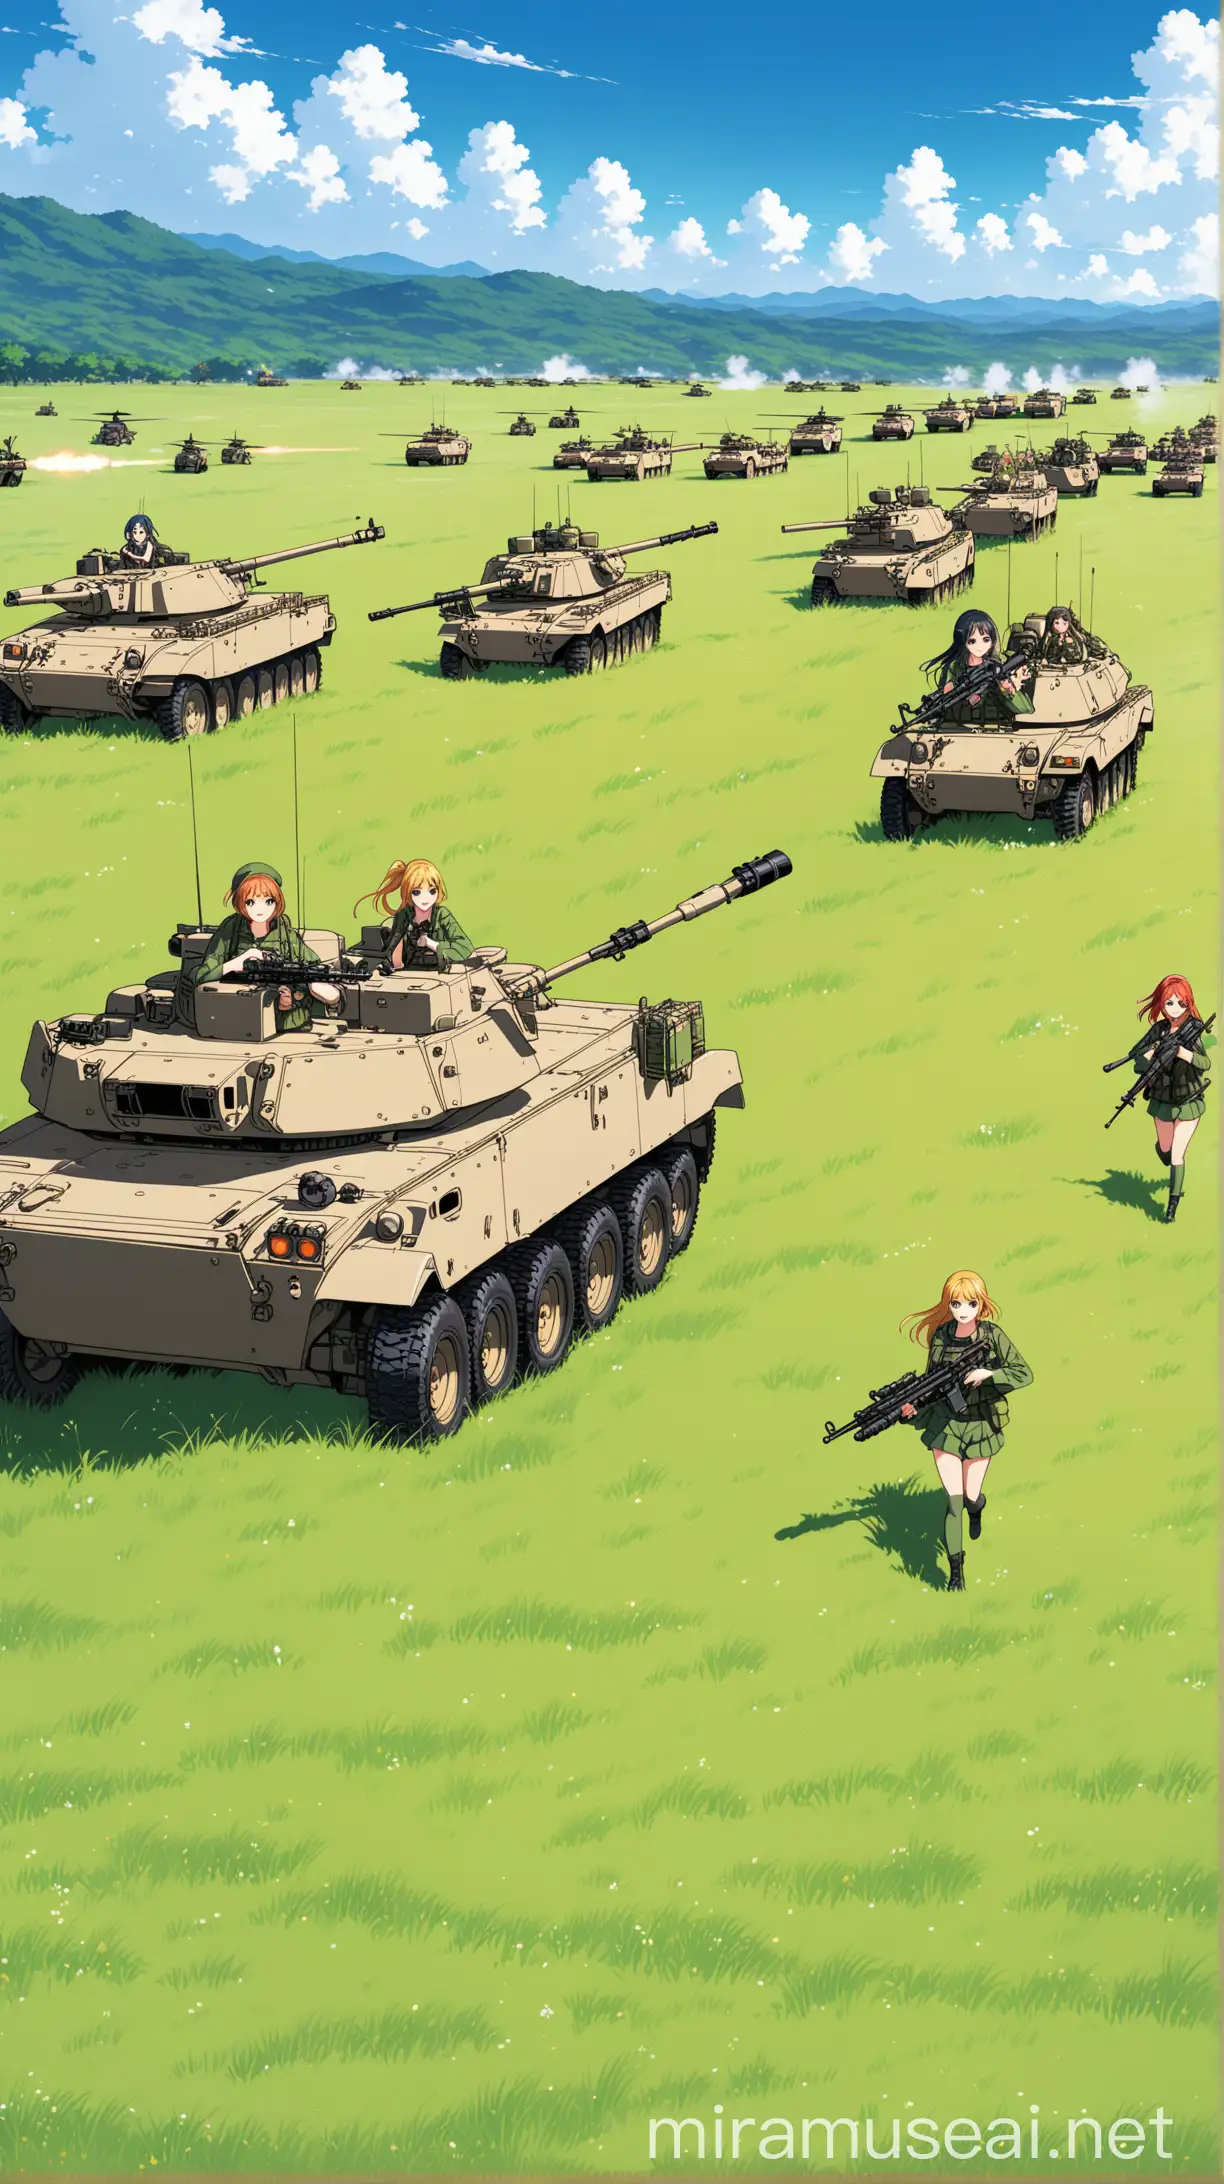 Anime Girls Military Parade Marching Through Grasslands with Snipers Tanks and Choppers